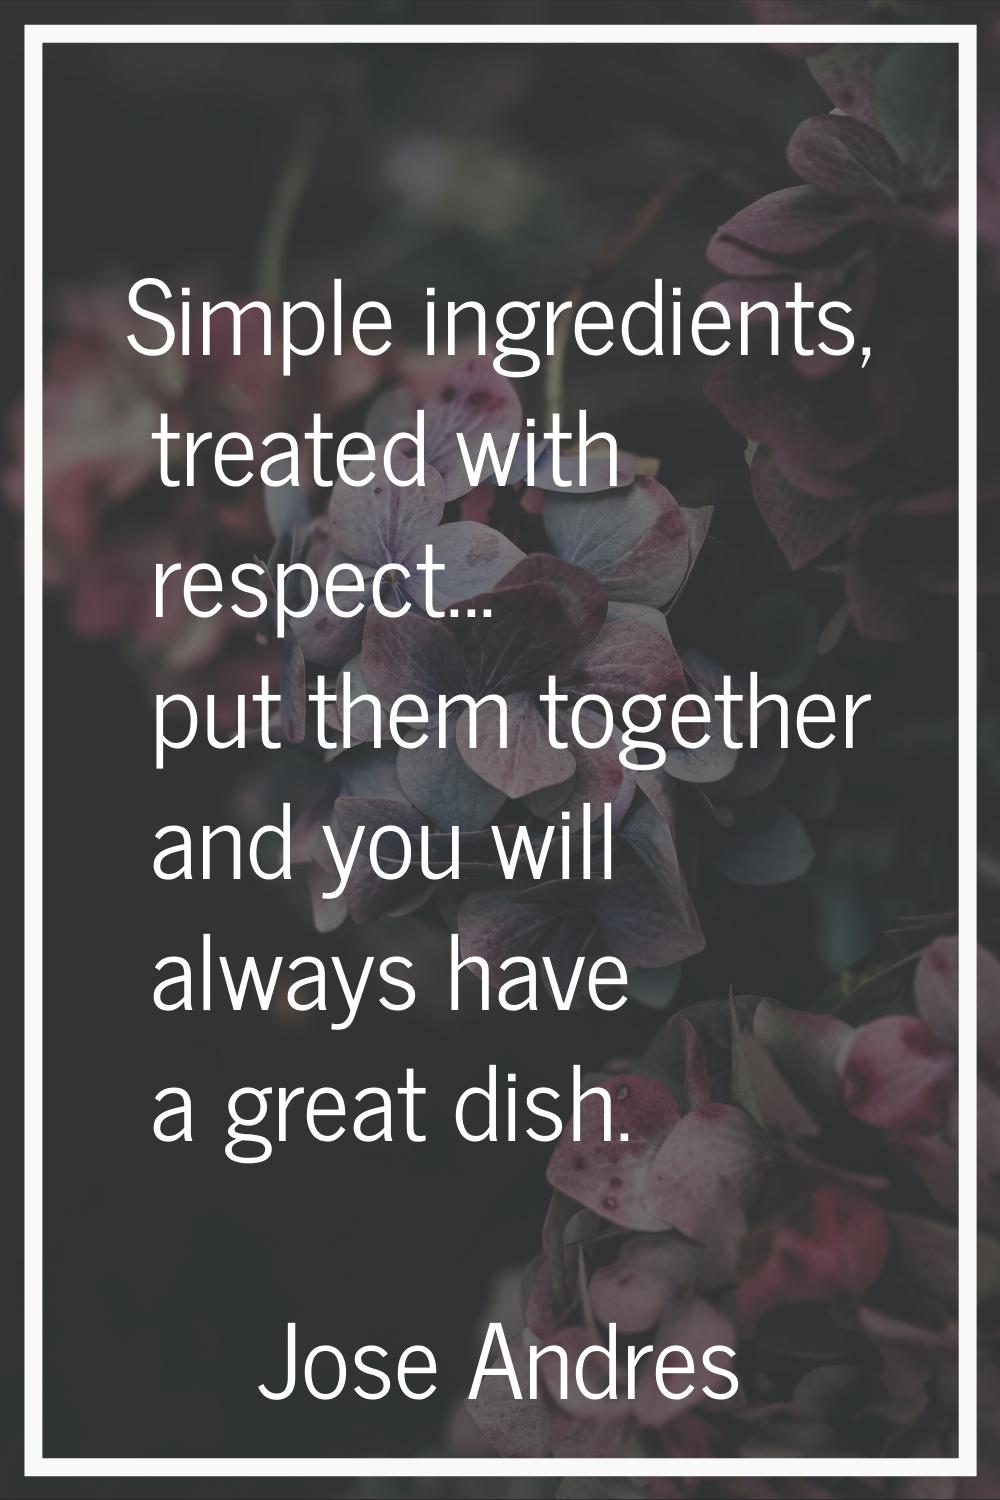 Simple ingredients, treated with respect... put them together and you will always have a great dish